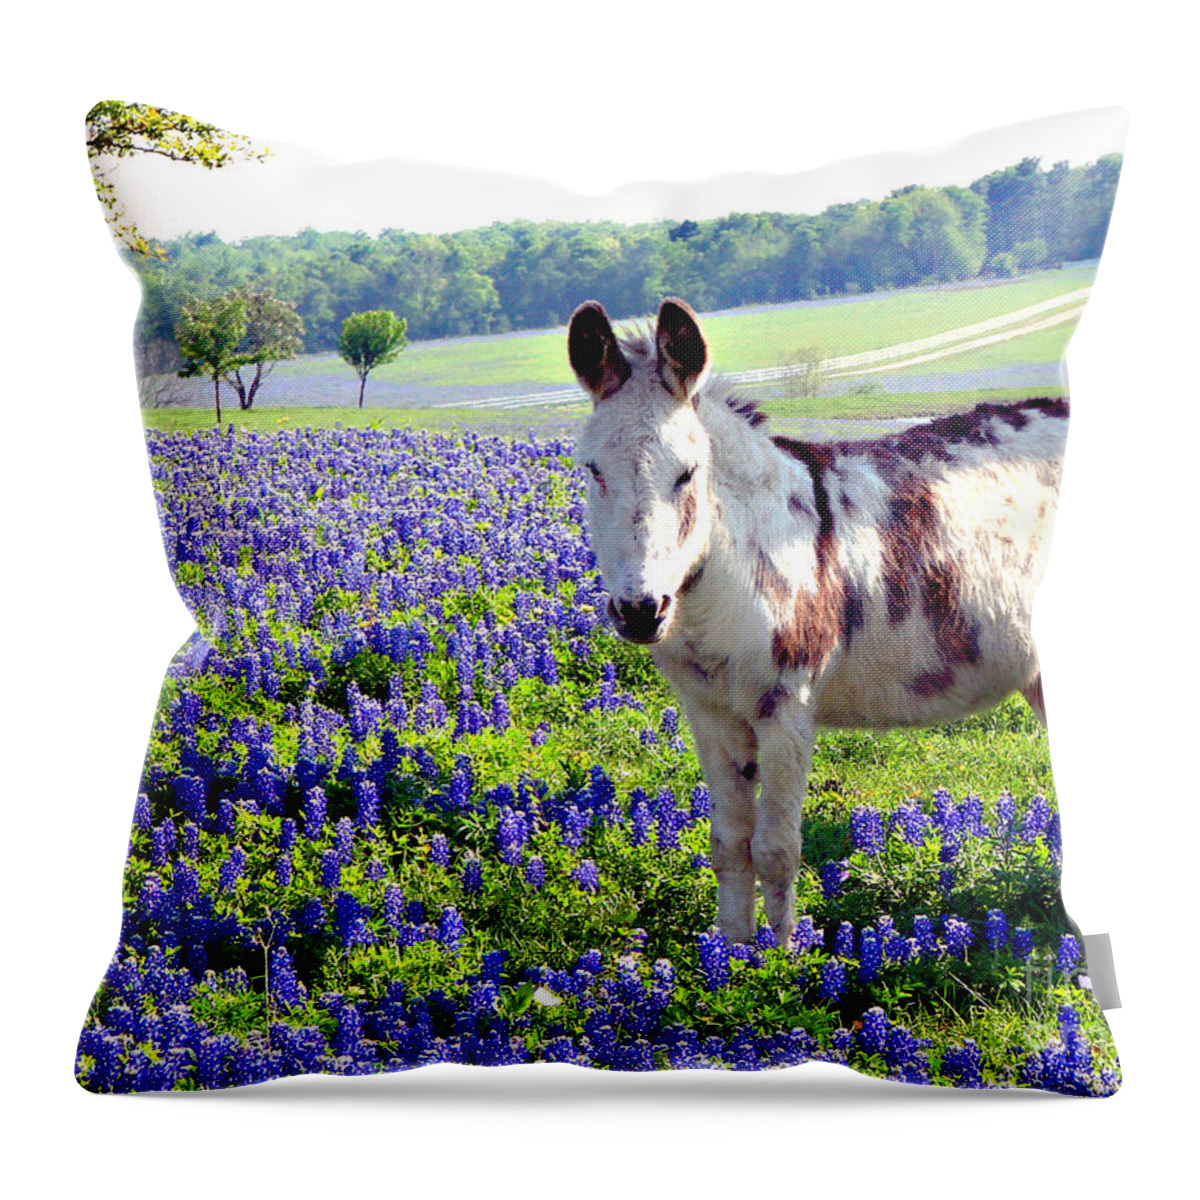 Bluebonnets Throw Pillow featuring the photograph Jesus Donkey In Bluebonnets #1 by Linda Cox